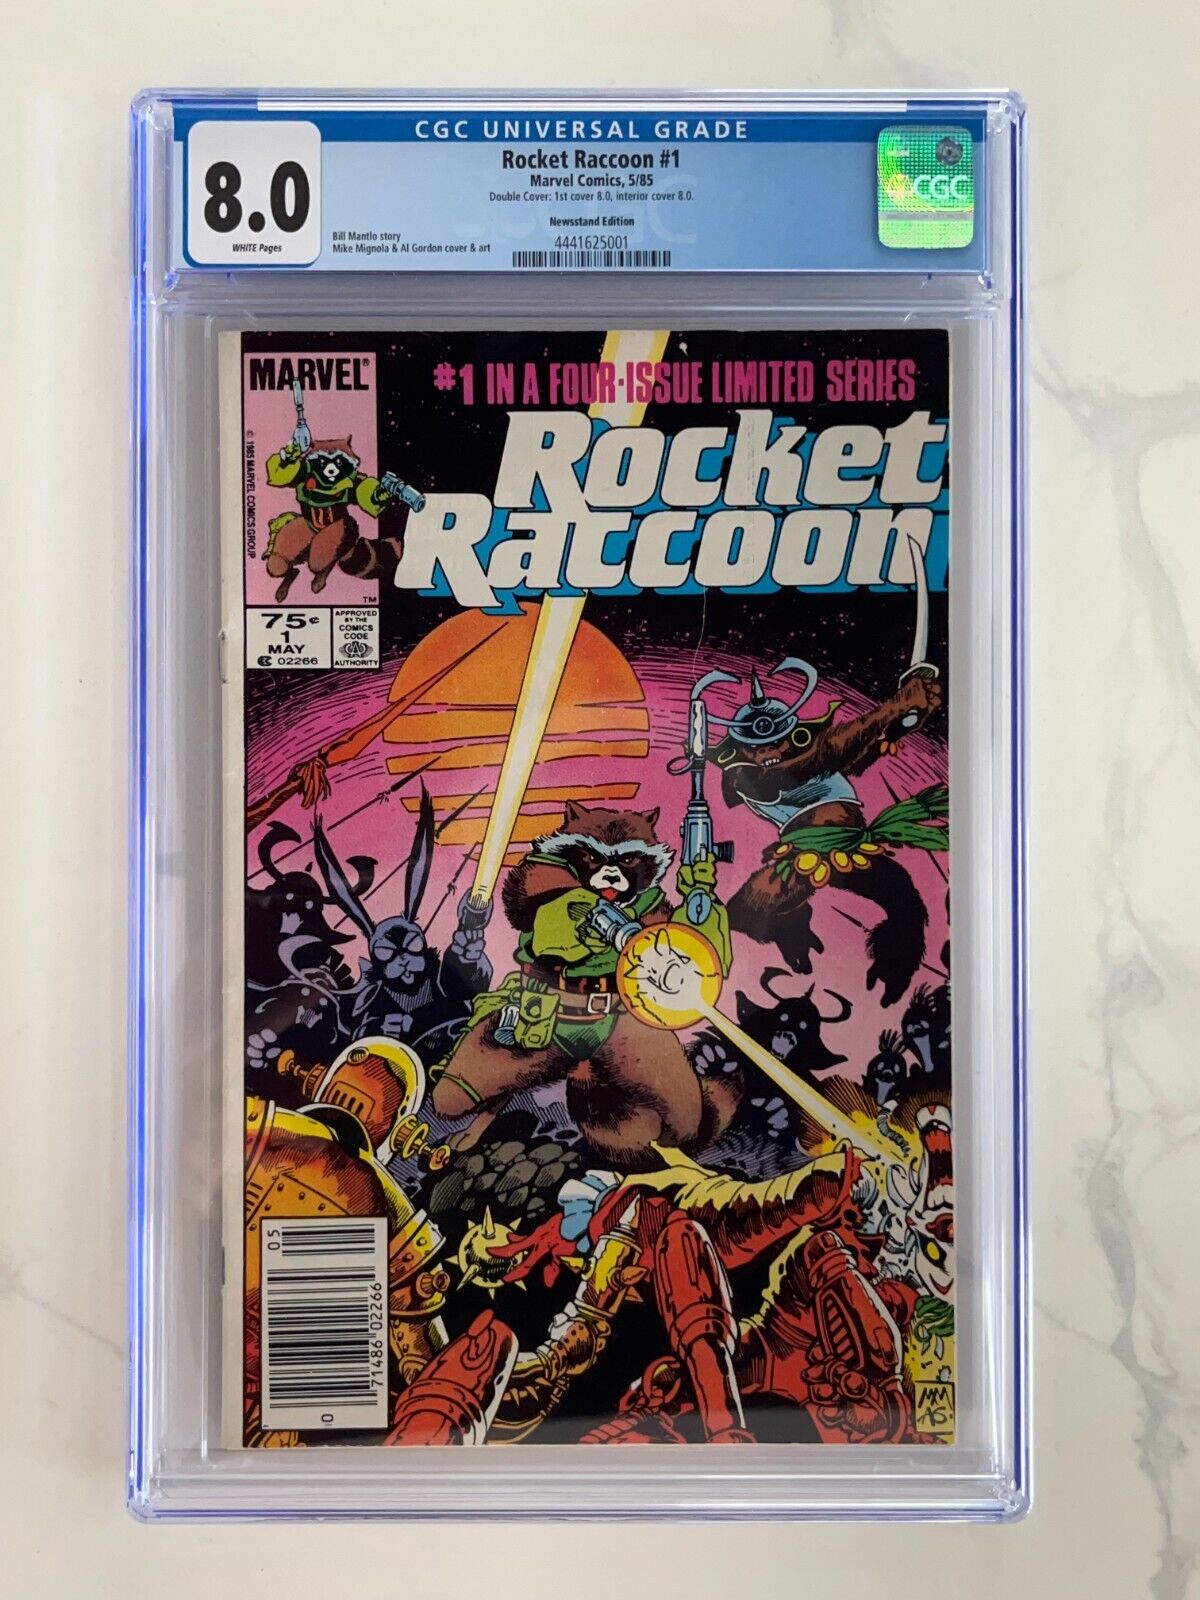 Rocket Raccoon #1 DOUBLE COVER/NEWSSTAND (Marvel, 1985, CGC 8.0, White Pages)